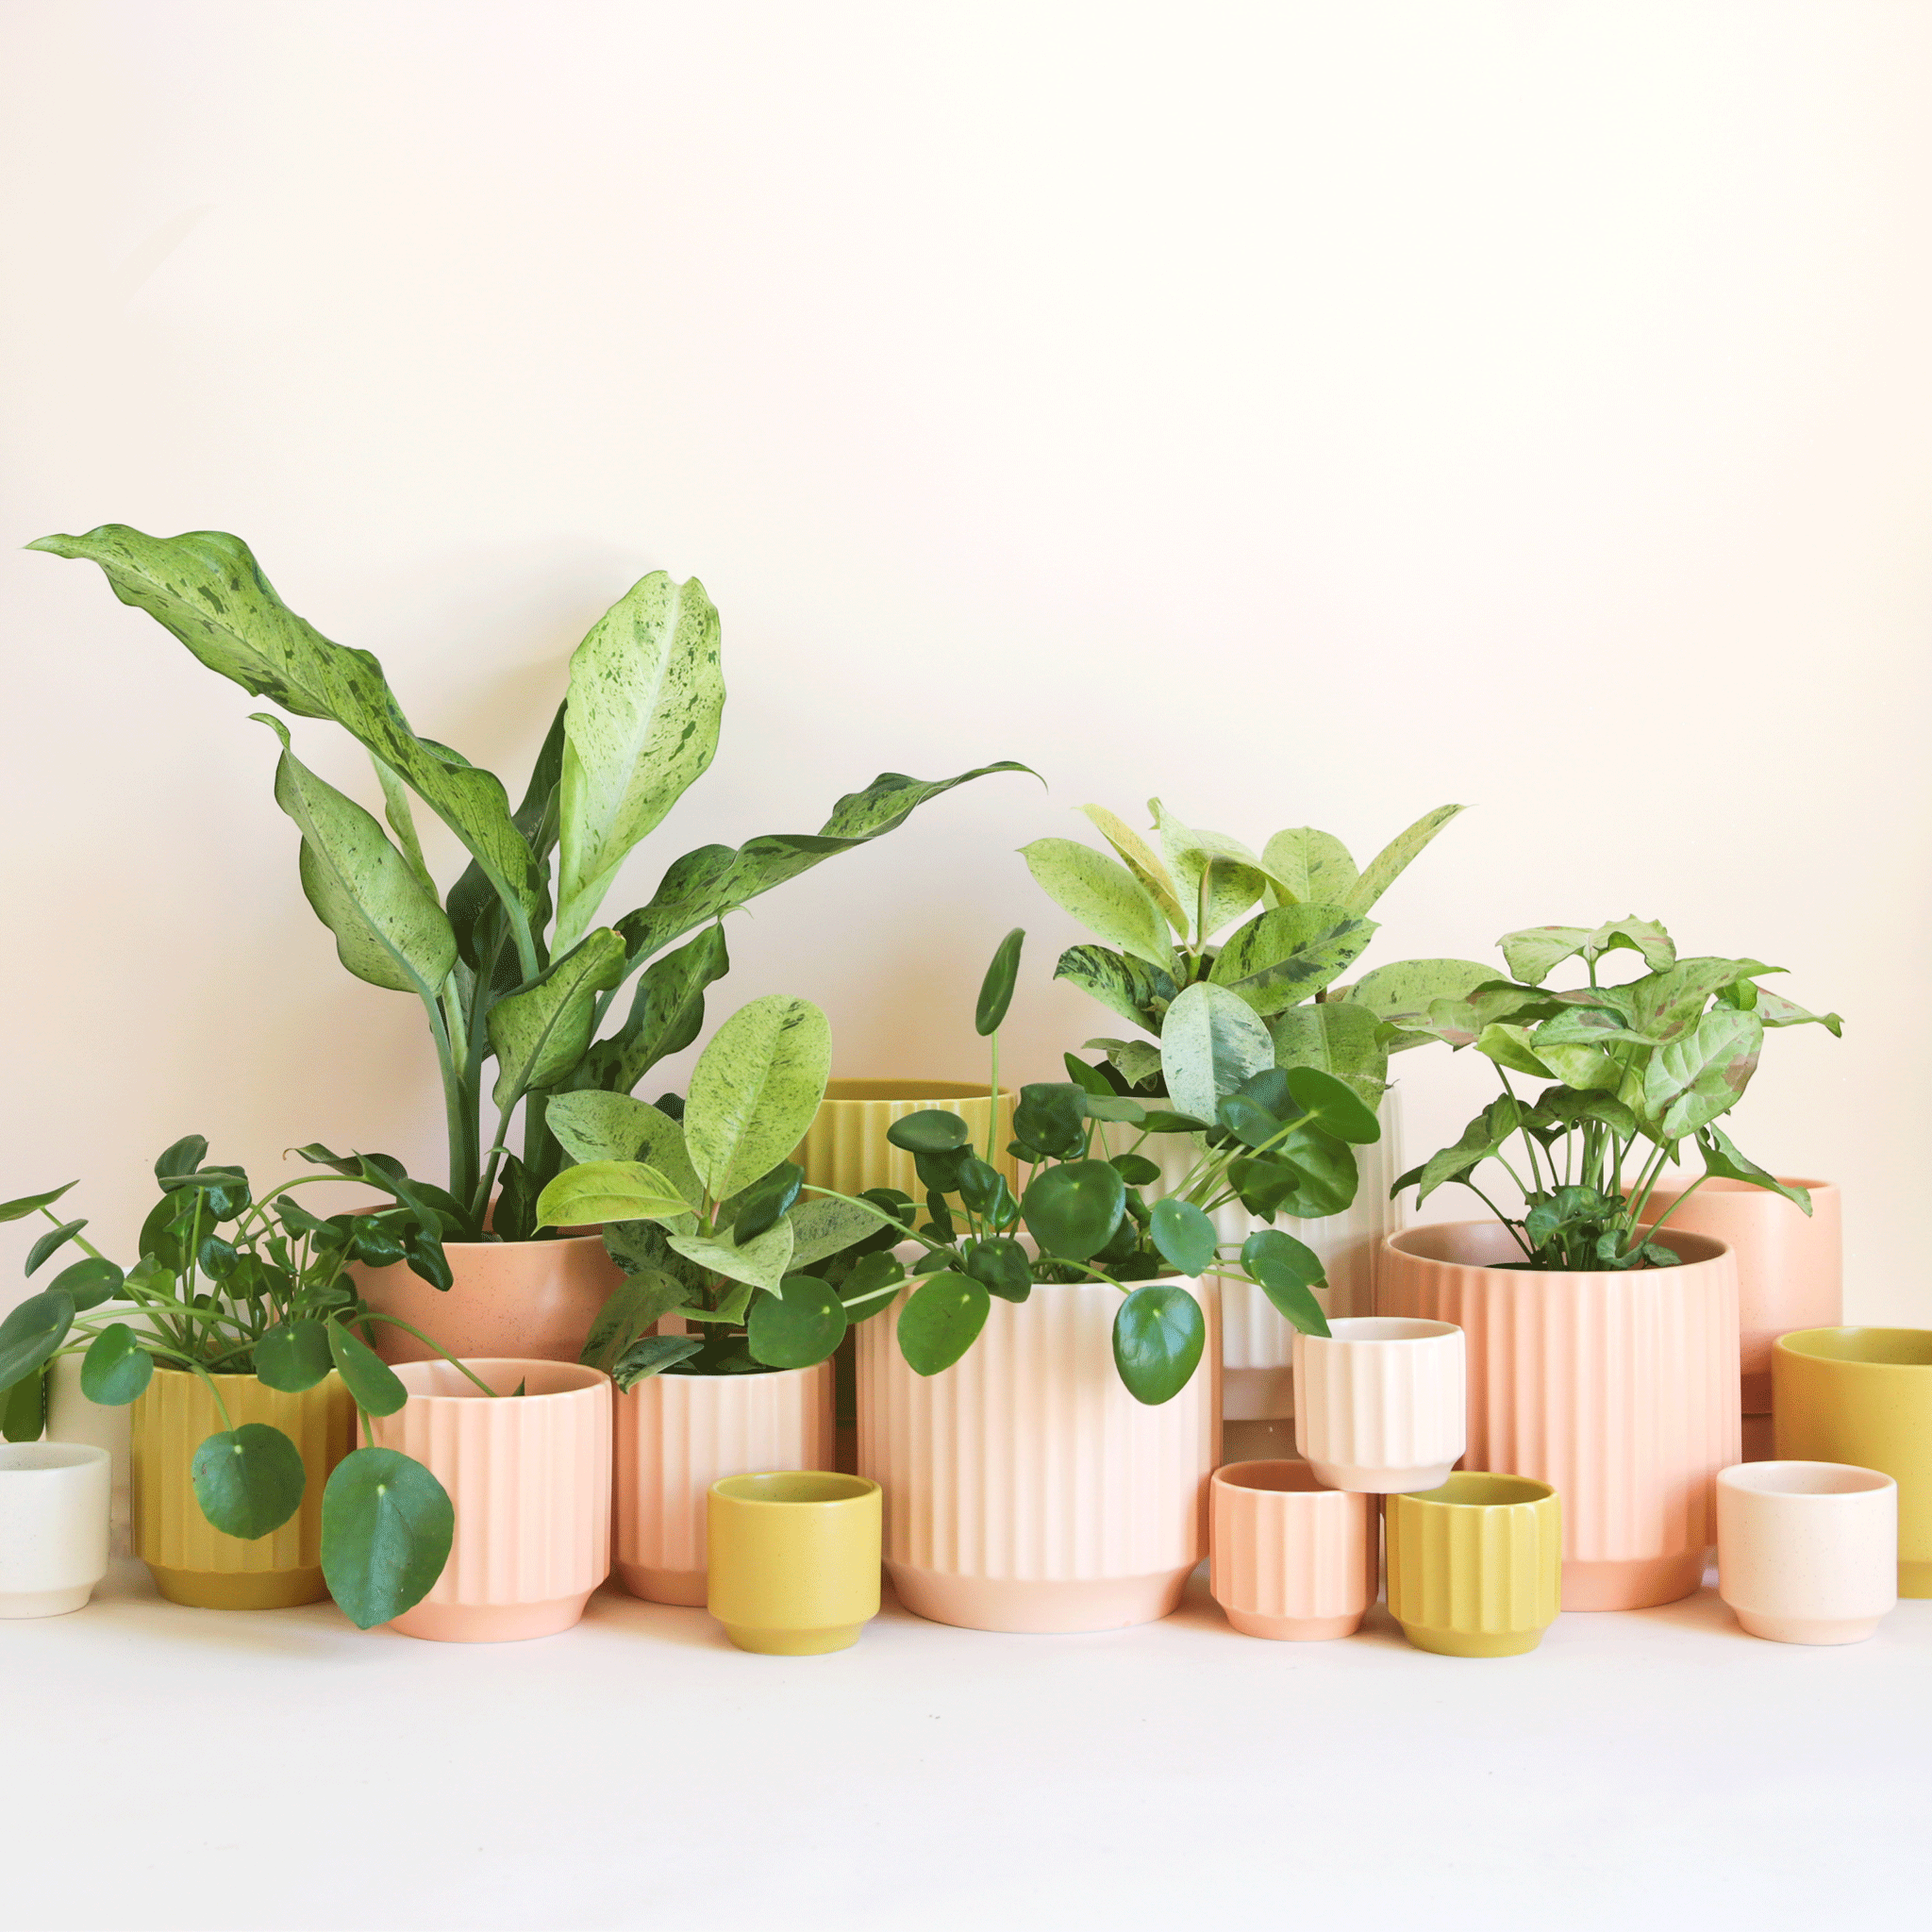 On an ivory background is a collection of ceramic planters with different finishes and colors and filled with green houseplants. There are ribbed planters, smooth options and a range of colors from ivory to salmon to a chartreuse green.